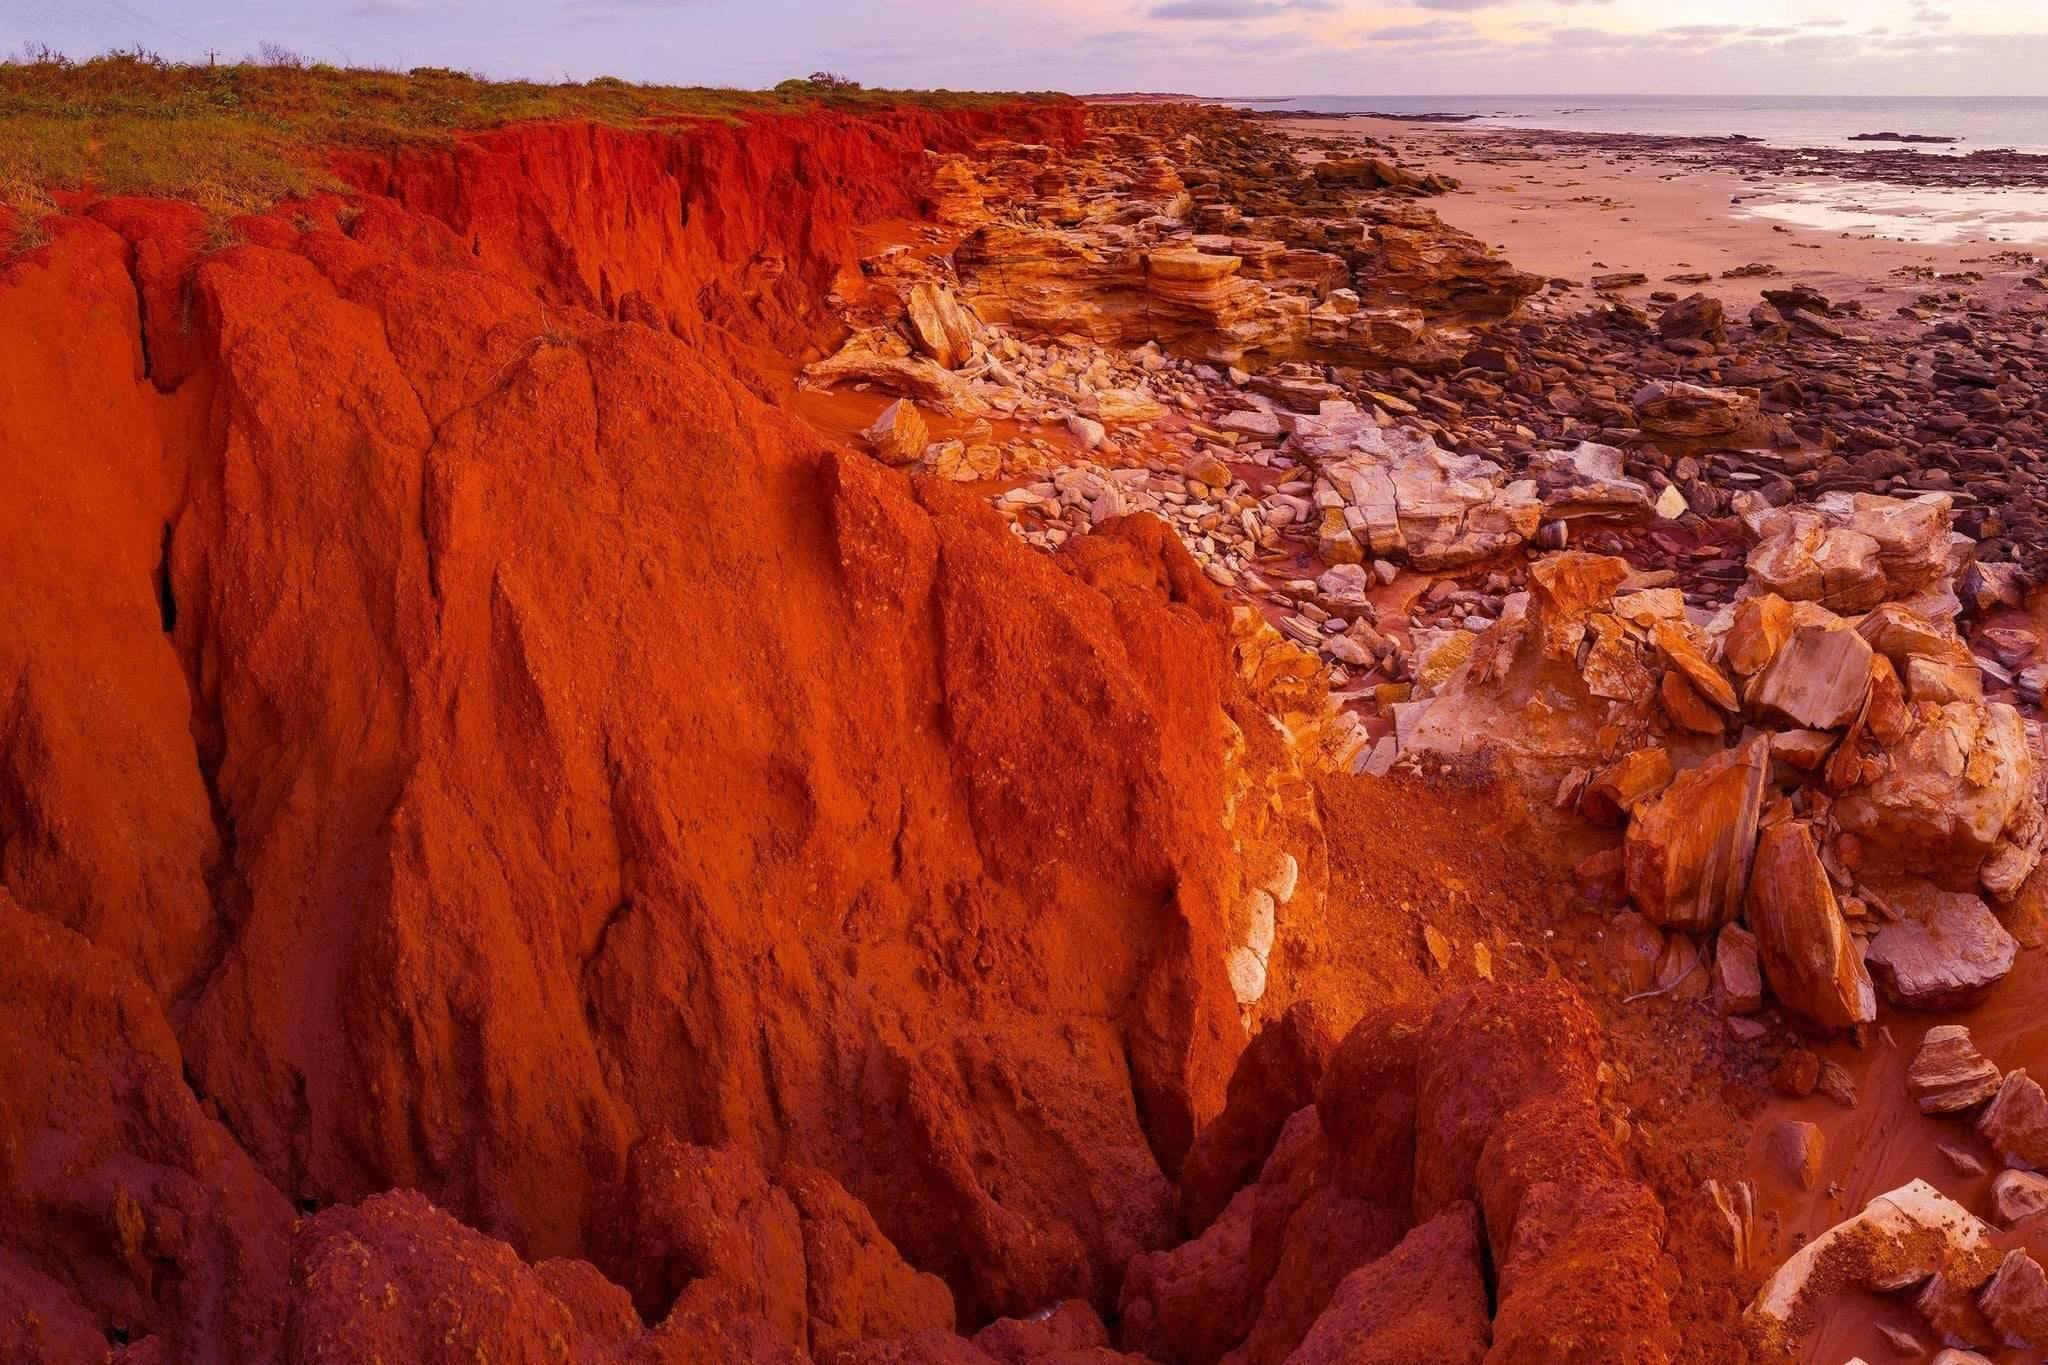 Long rocks sequence with burning orange color, Reddell Beach, Broome - The Kimberley WA